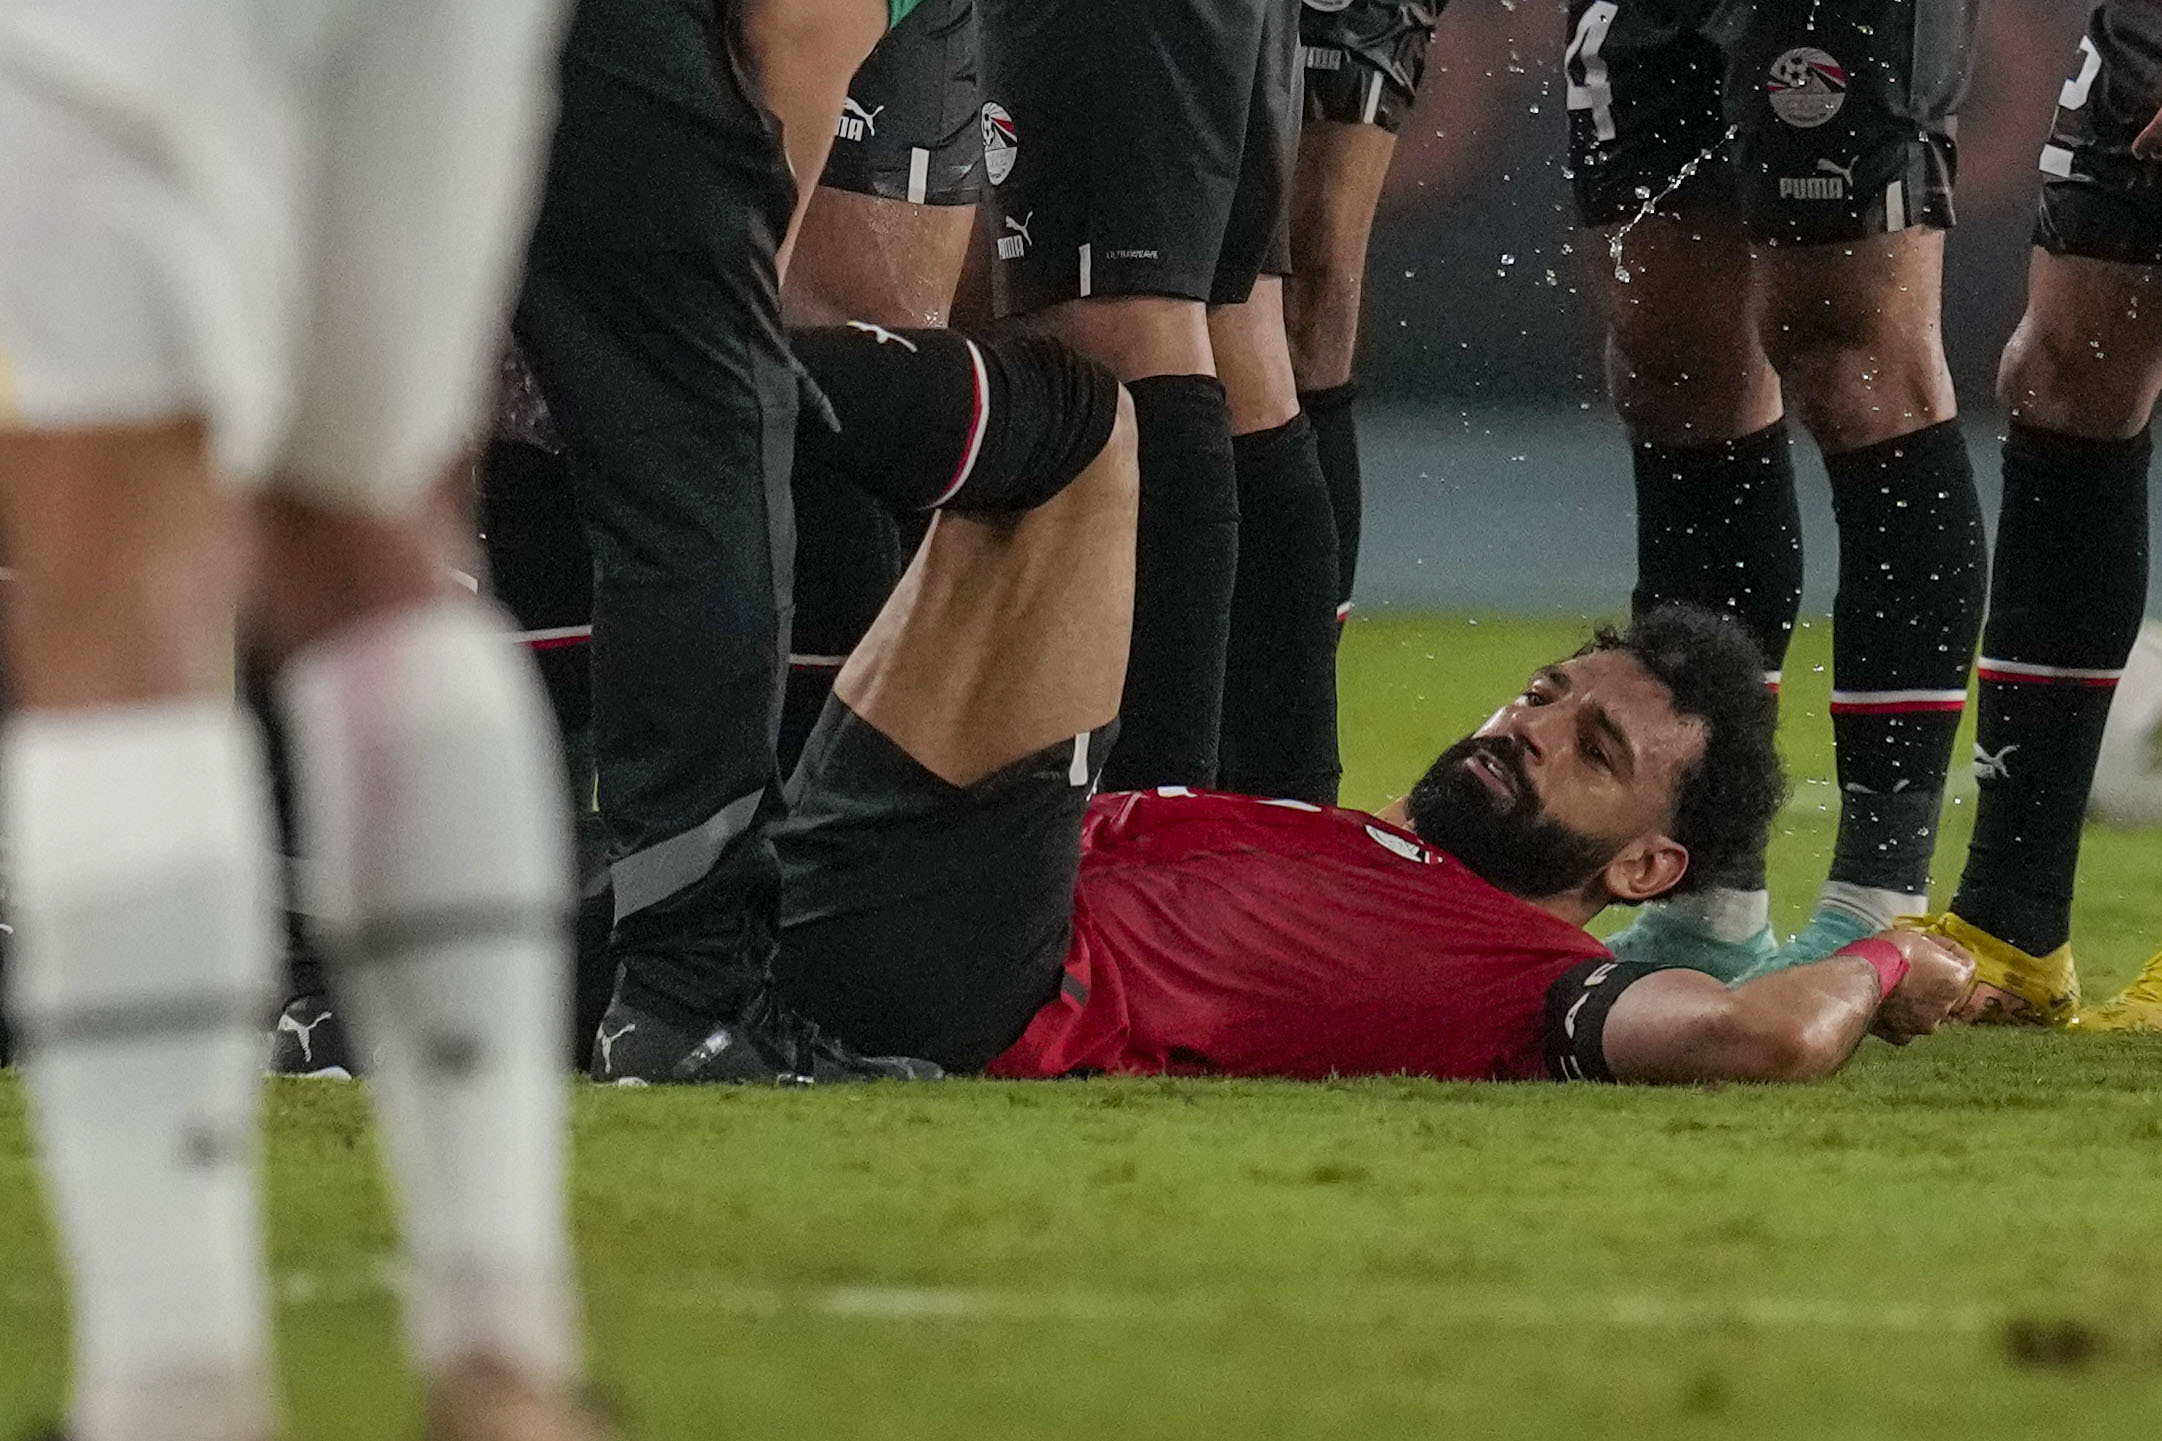 Mohamed Salah is injured and the Egyptian national team is in danger in the African Cup of Nations